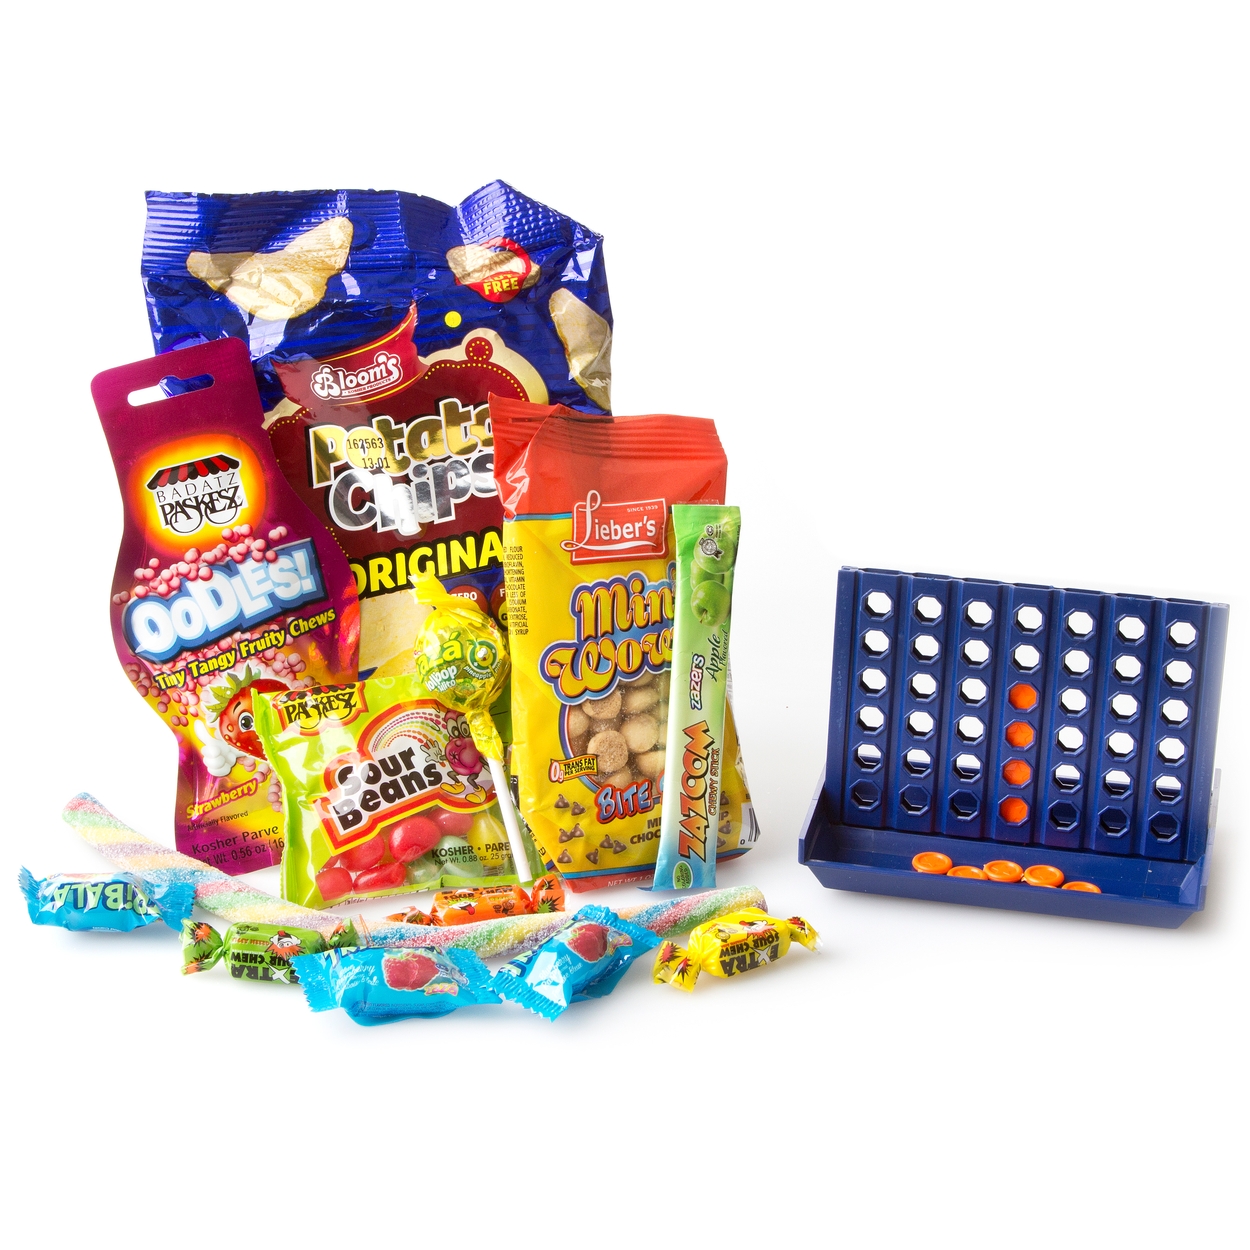 4 In A Row Kids Purim Gift Shalach Manos 8 Pack For Baskets Mishloach Manot Gifts Themes Oh Nuts